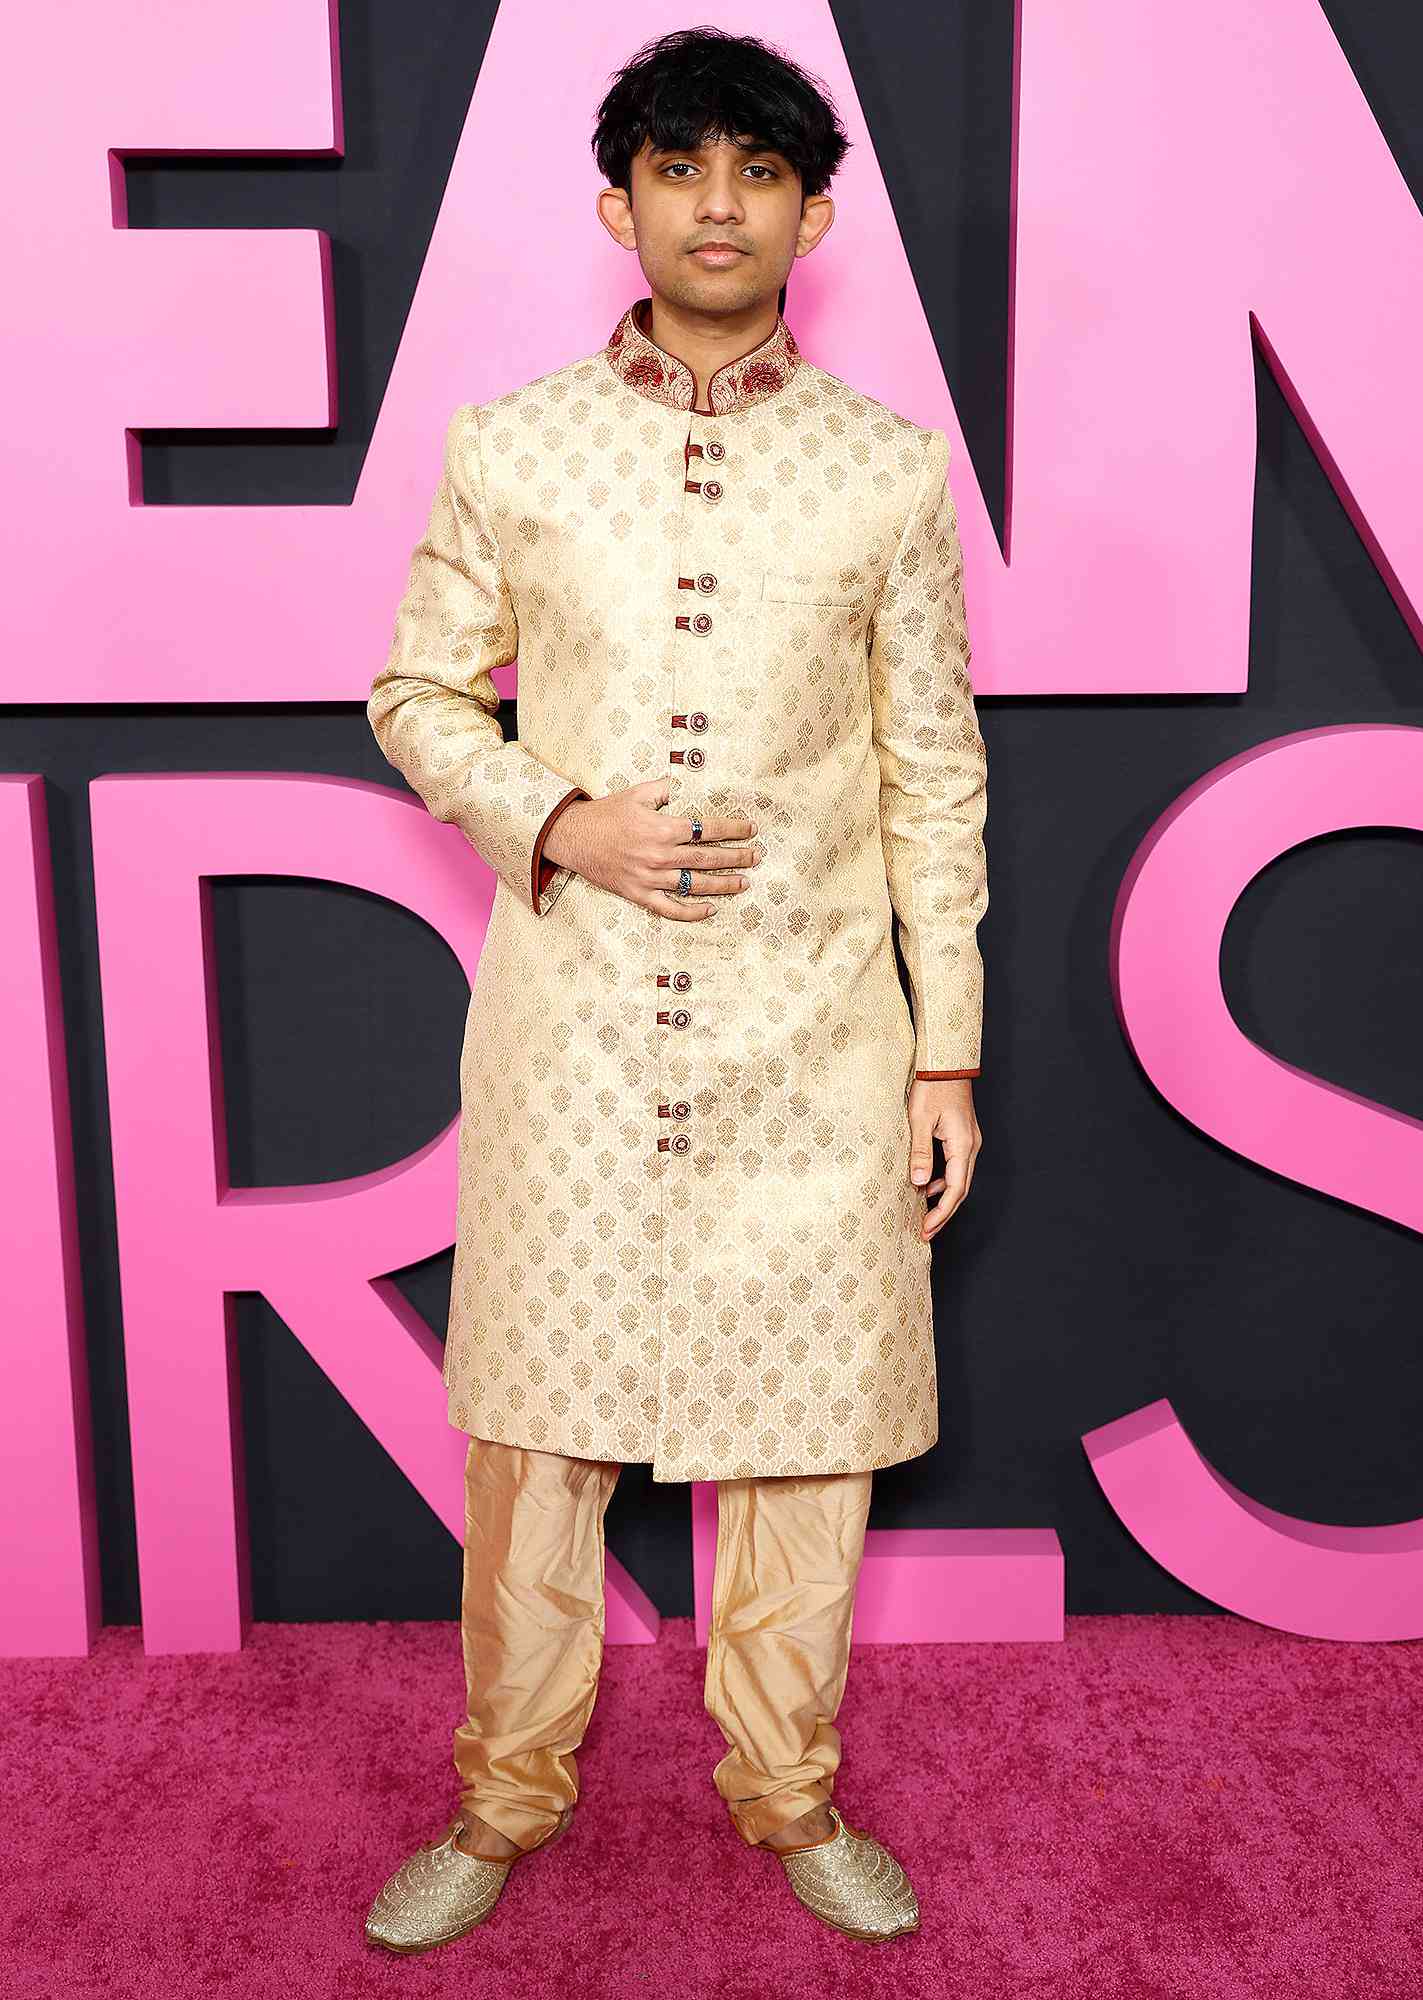 Mahi Alam attends the "Mean Girls" New York premiere